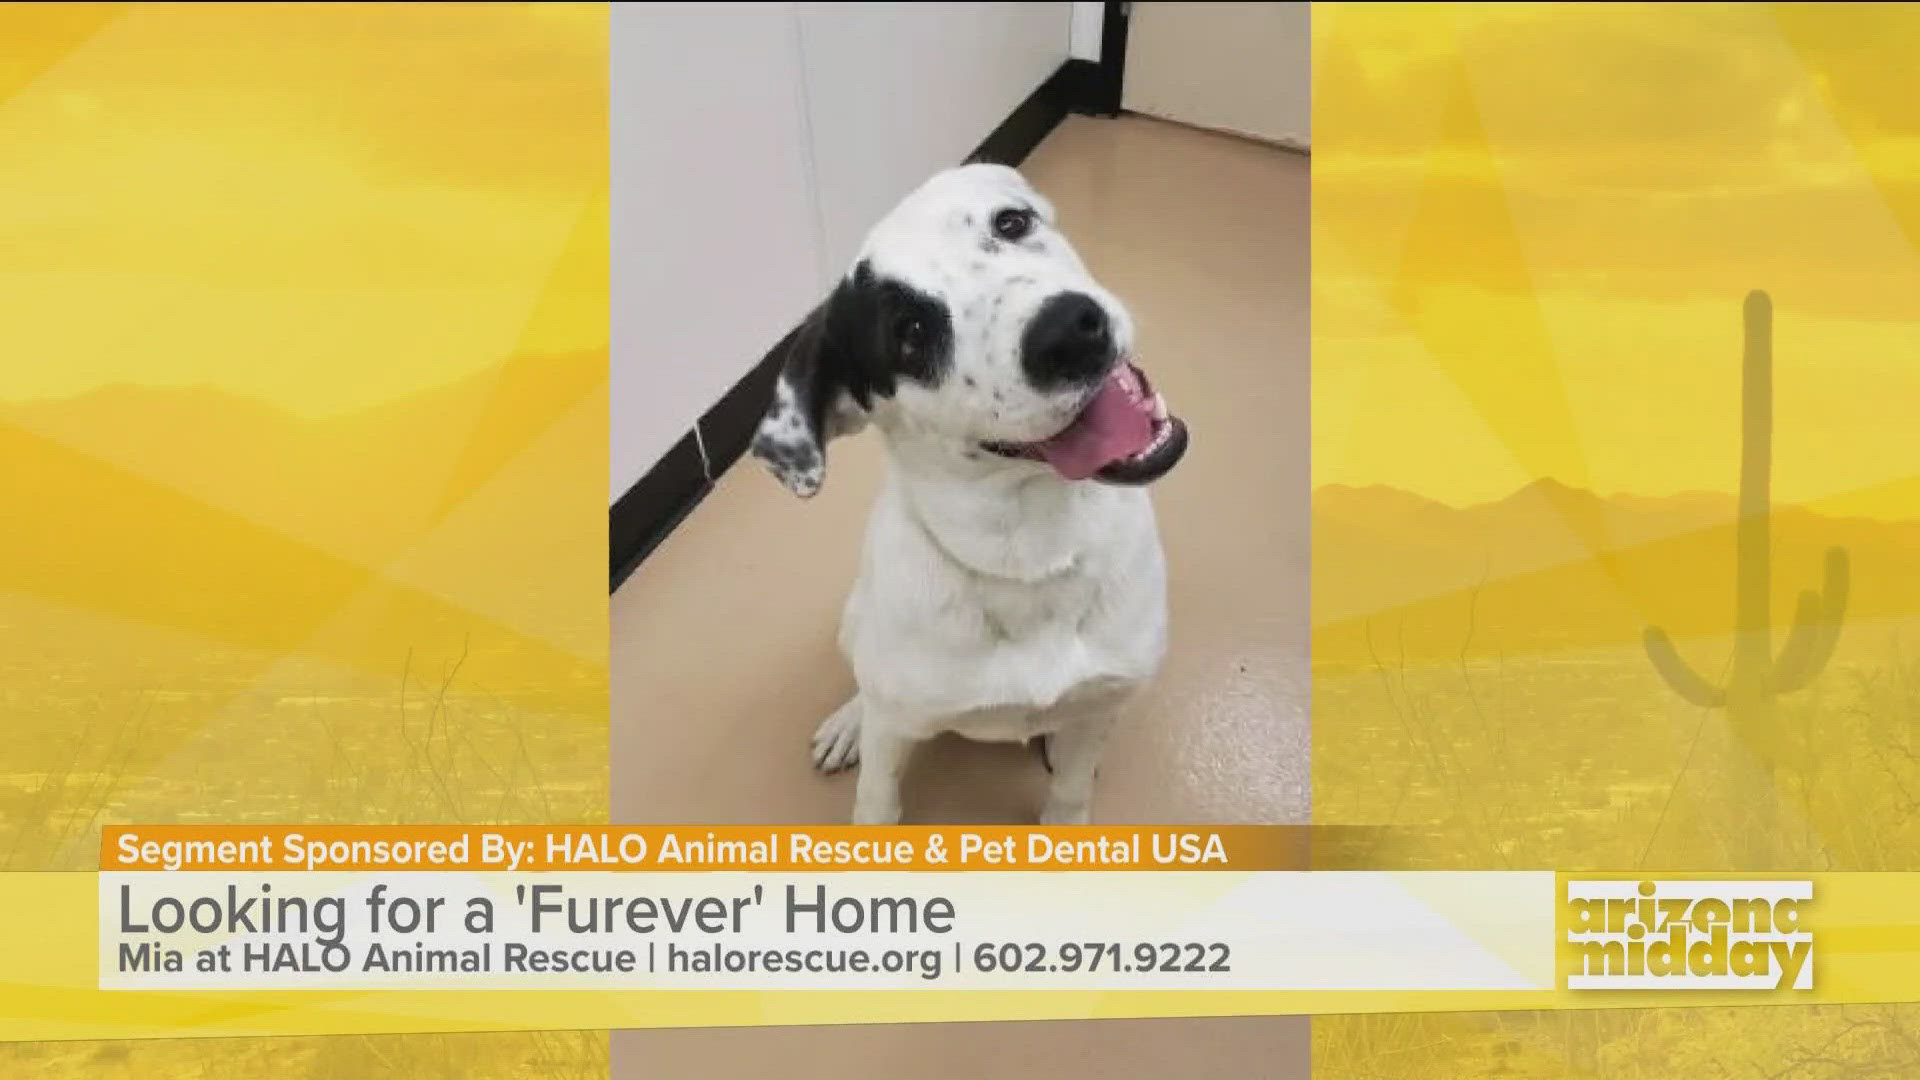 HALO Pet Rescue shared Mia’s information to help her find a “furever” home and help with Krystle’s weekend Fido's Forecast.